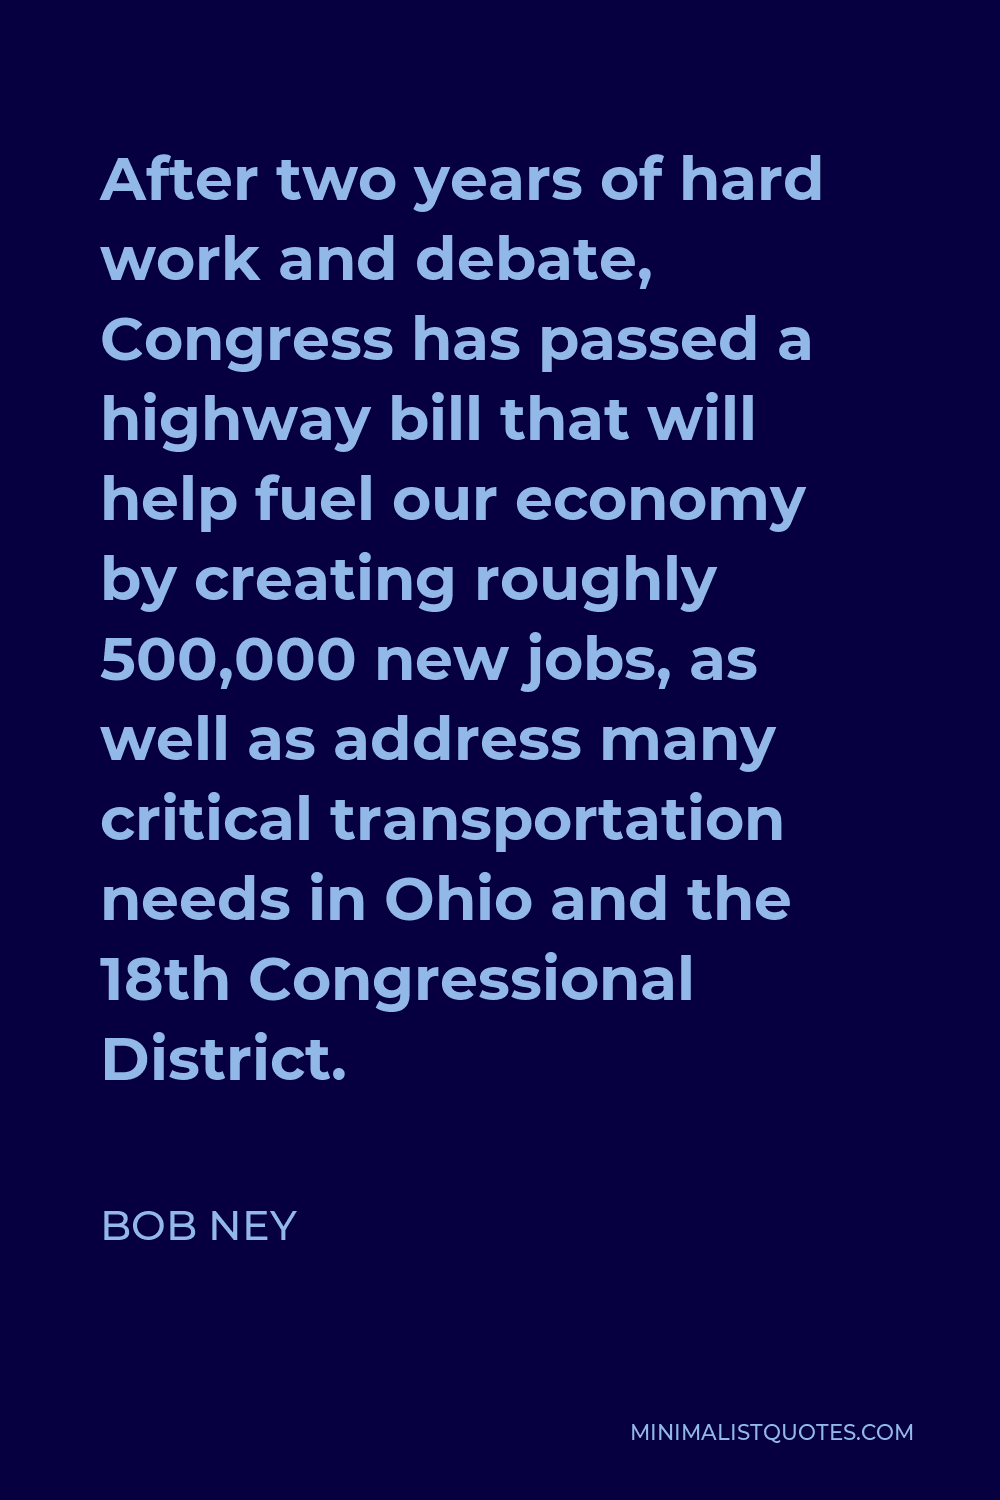 Bob Ney Quote - After two years of hard work and debate, Congress has passed a highway bill that will help fuel our economy by creating roughly 500,000 new jobs, as well as address many critical transportation needs in Ohio and the 18th Congressional District.